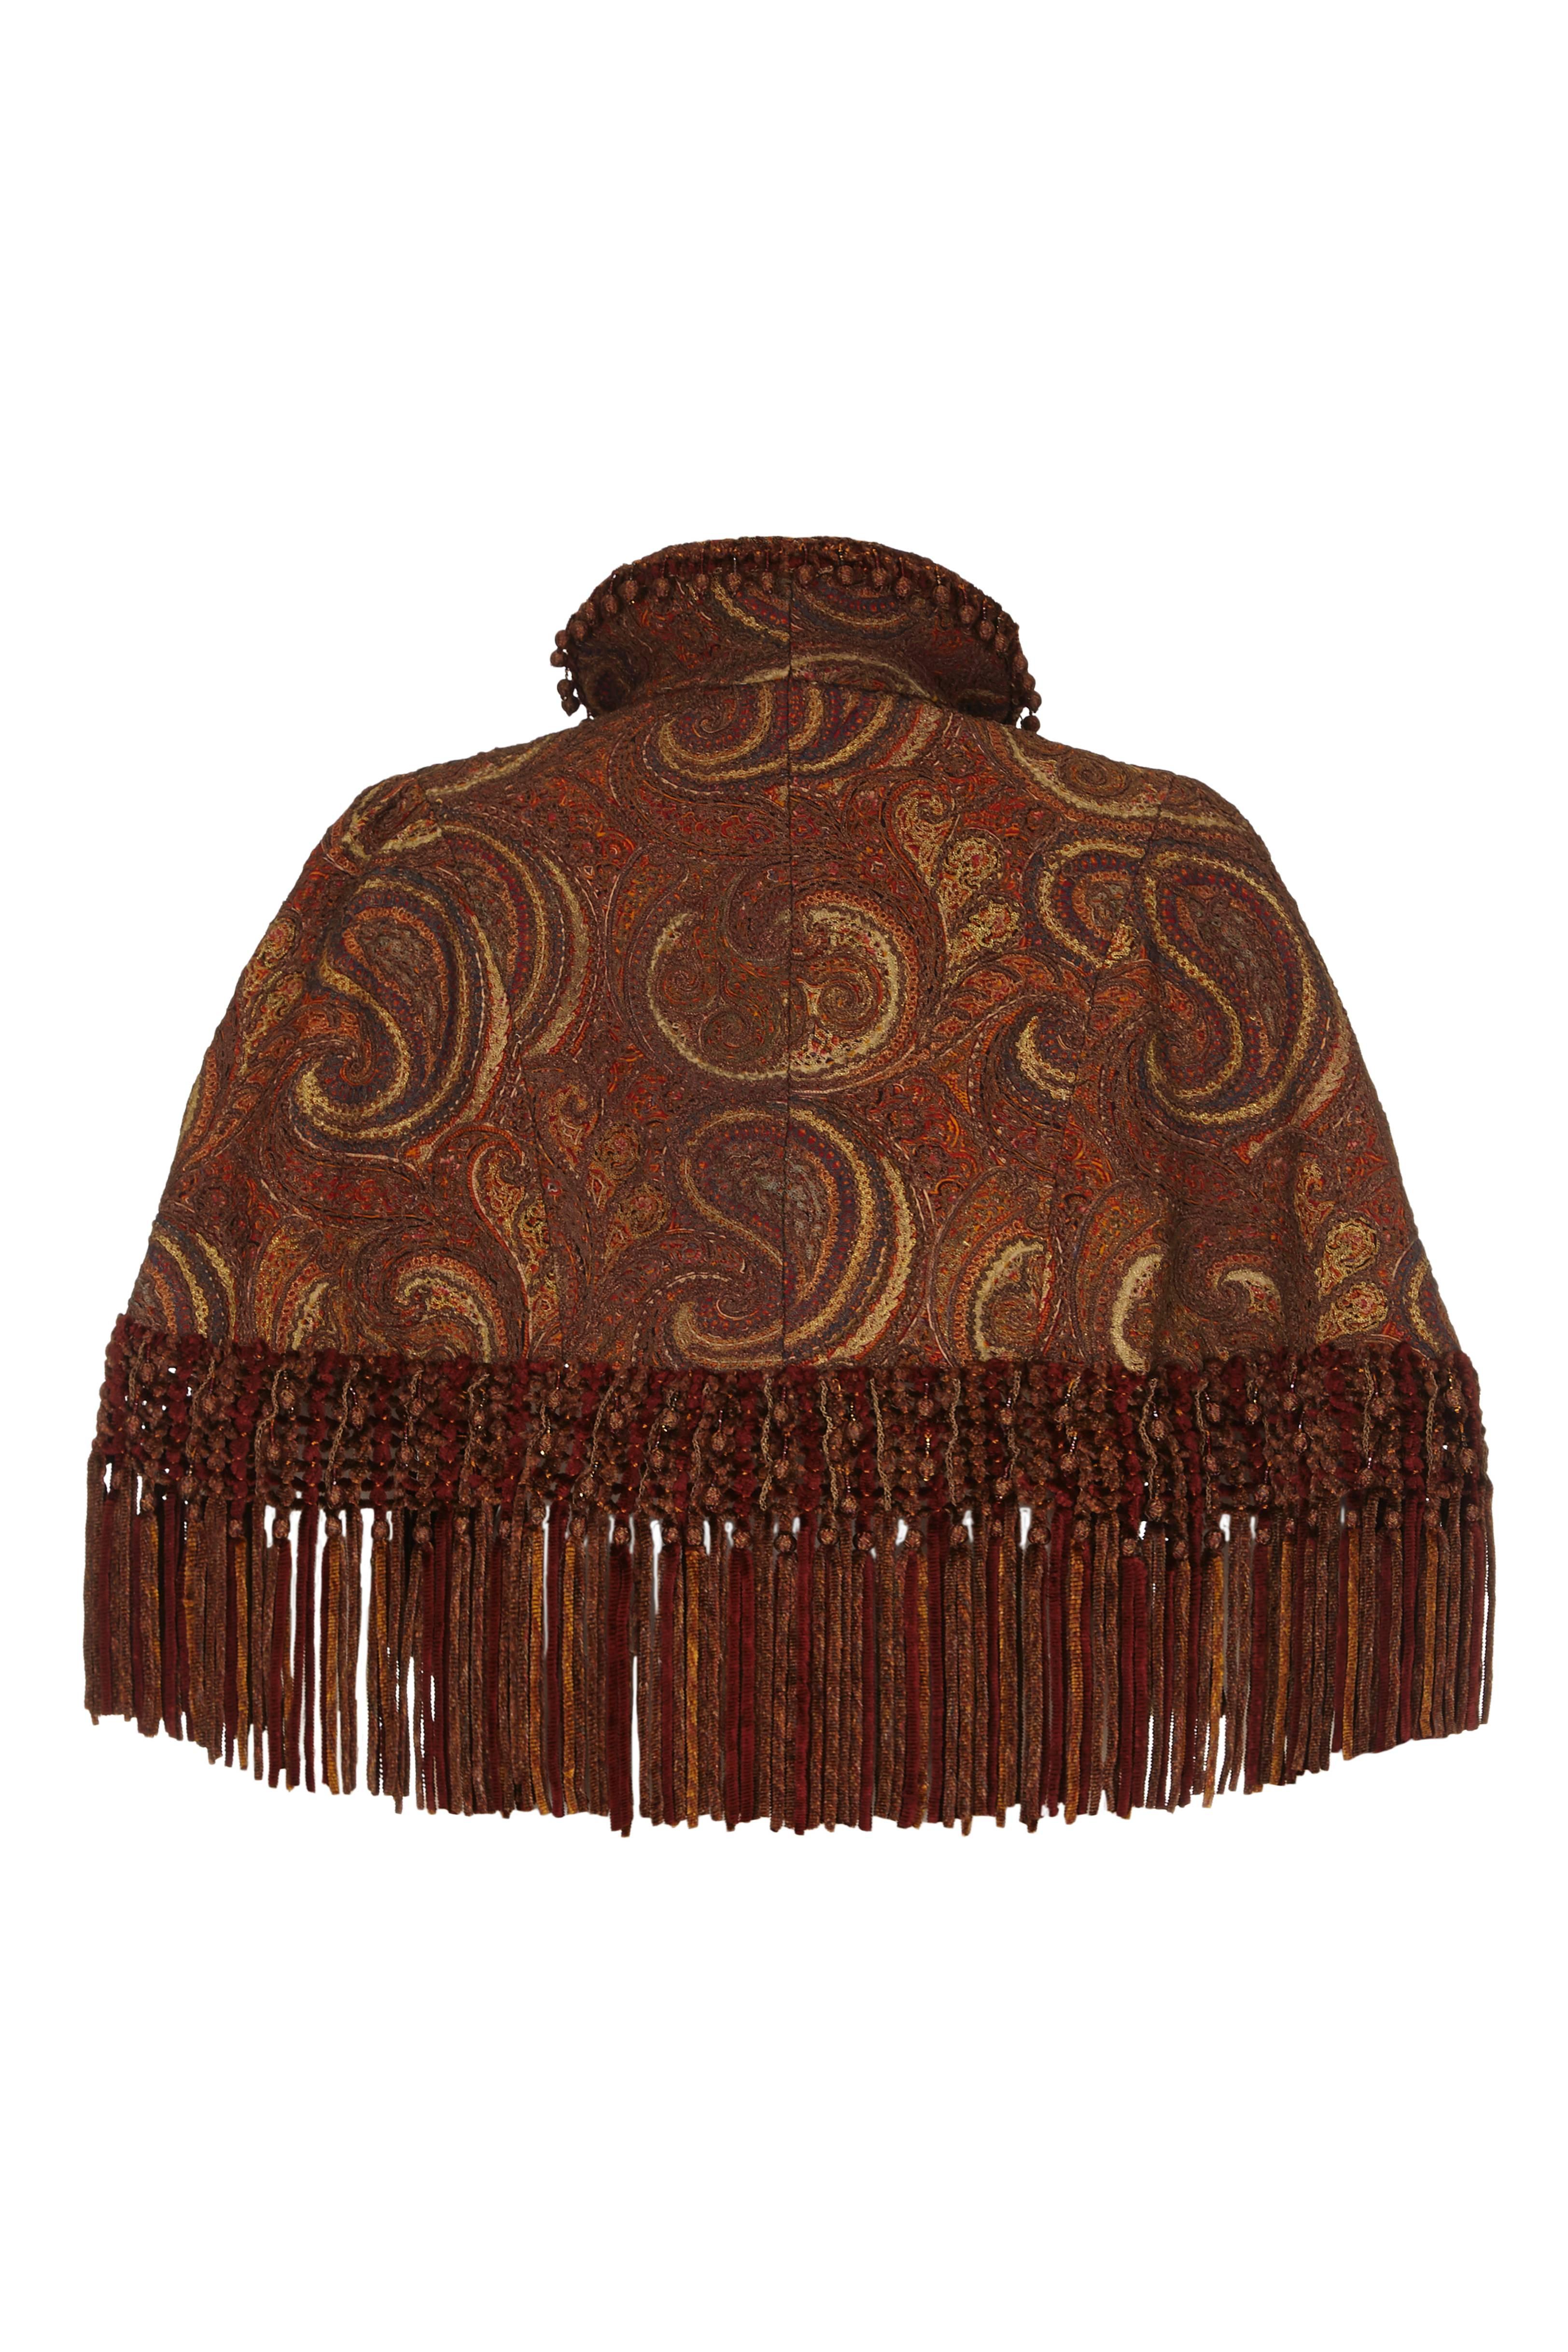 Exquisite Victorian cape in a lovely paisley fabric that has been heavily embroidered in bronze and gold tones to give a rich textured, heavy and luxurious finish.  The cape dates from the 1870s and is trimmed at the hem with coordinating chenille